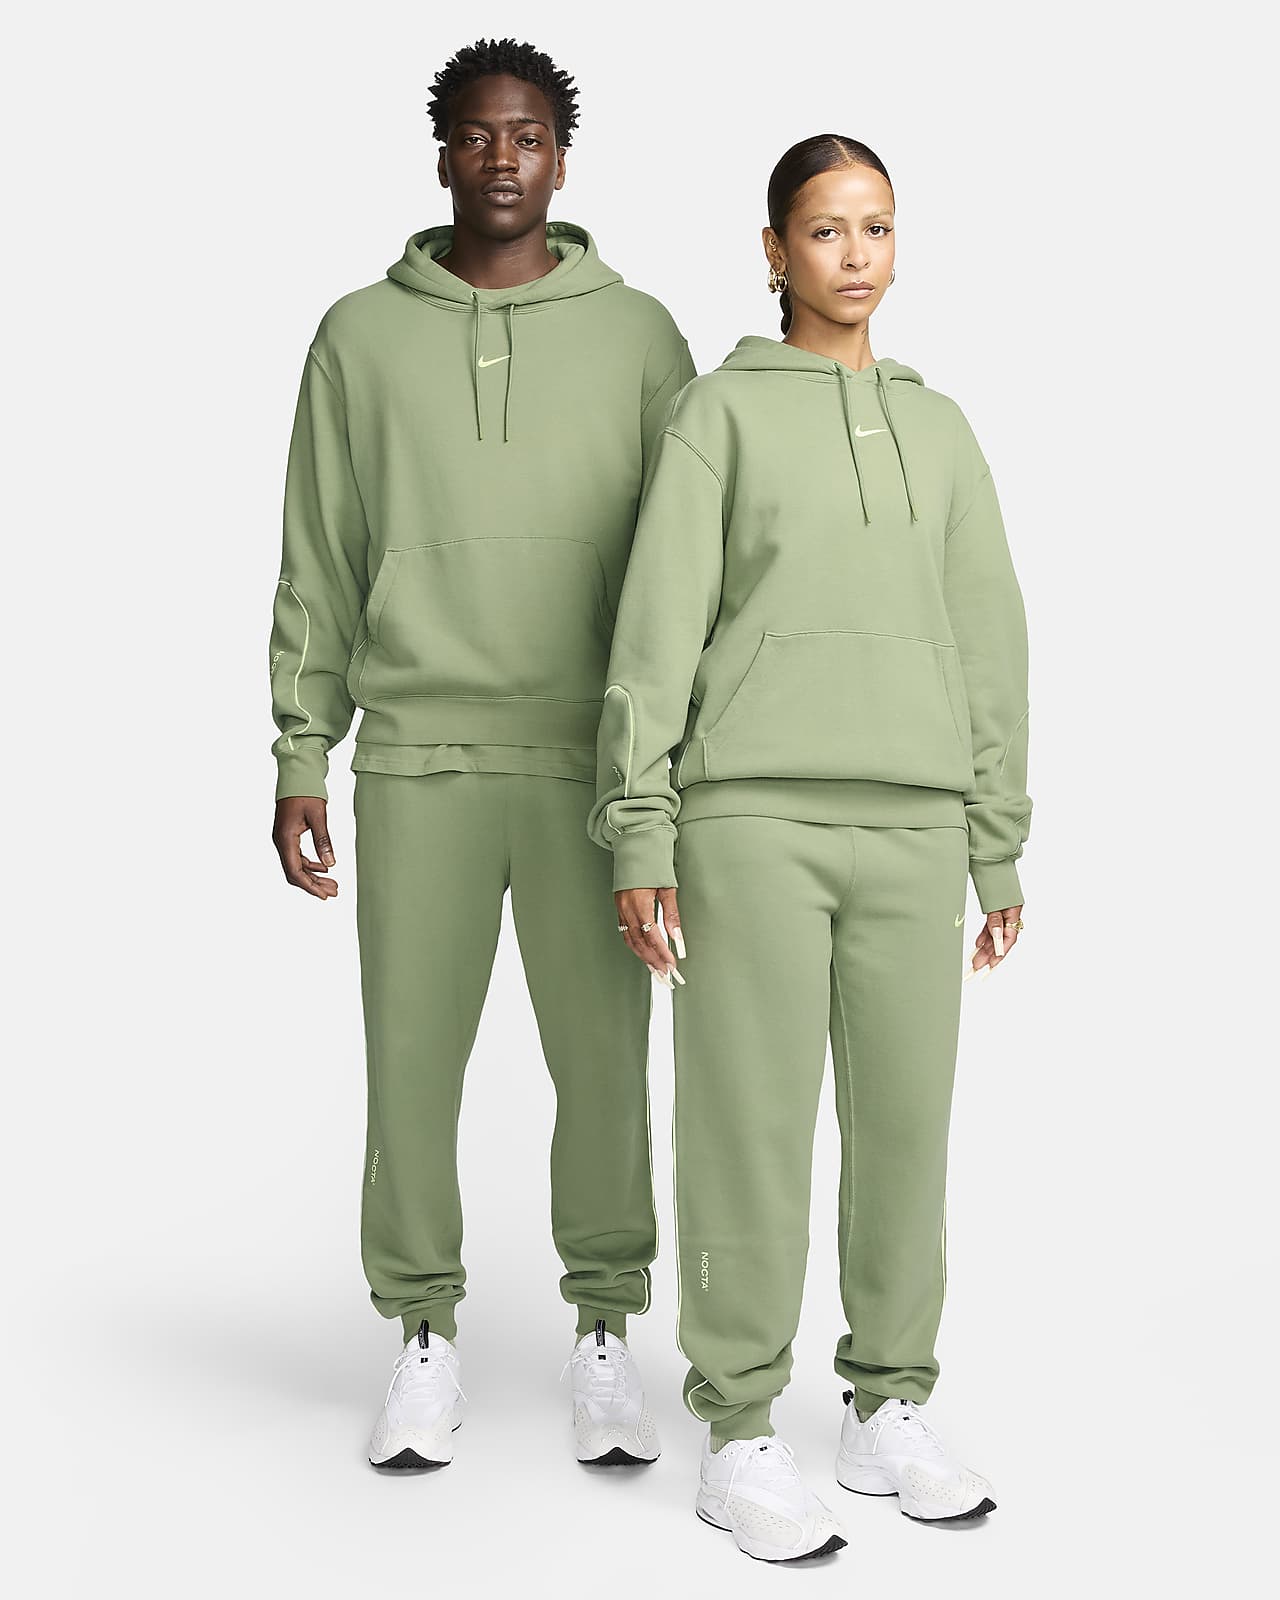 Nike x Drake Nocta Pants Fleece grey for man - Pants  Holypopstore -  Retail innovators to fuel the culture of sneakers